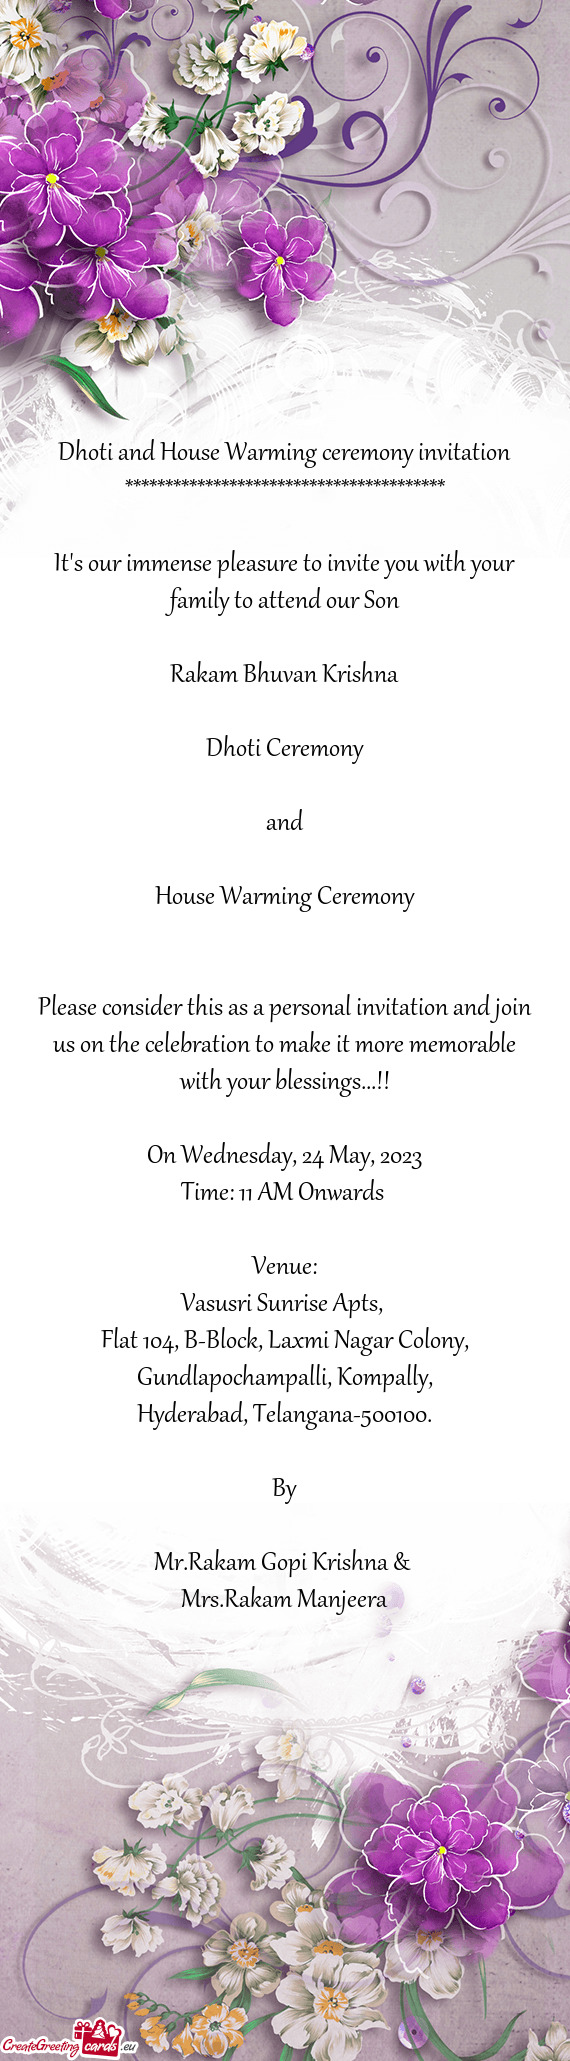 Dhoti and House Warming ceremony invitation